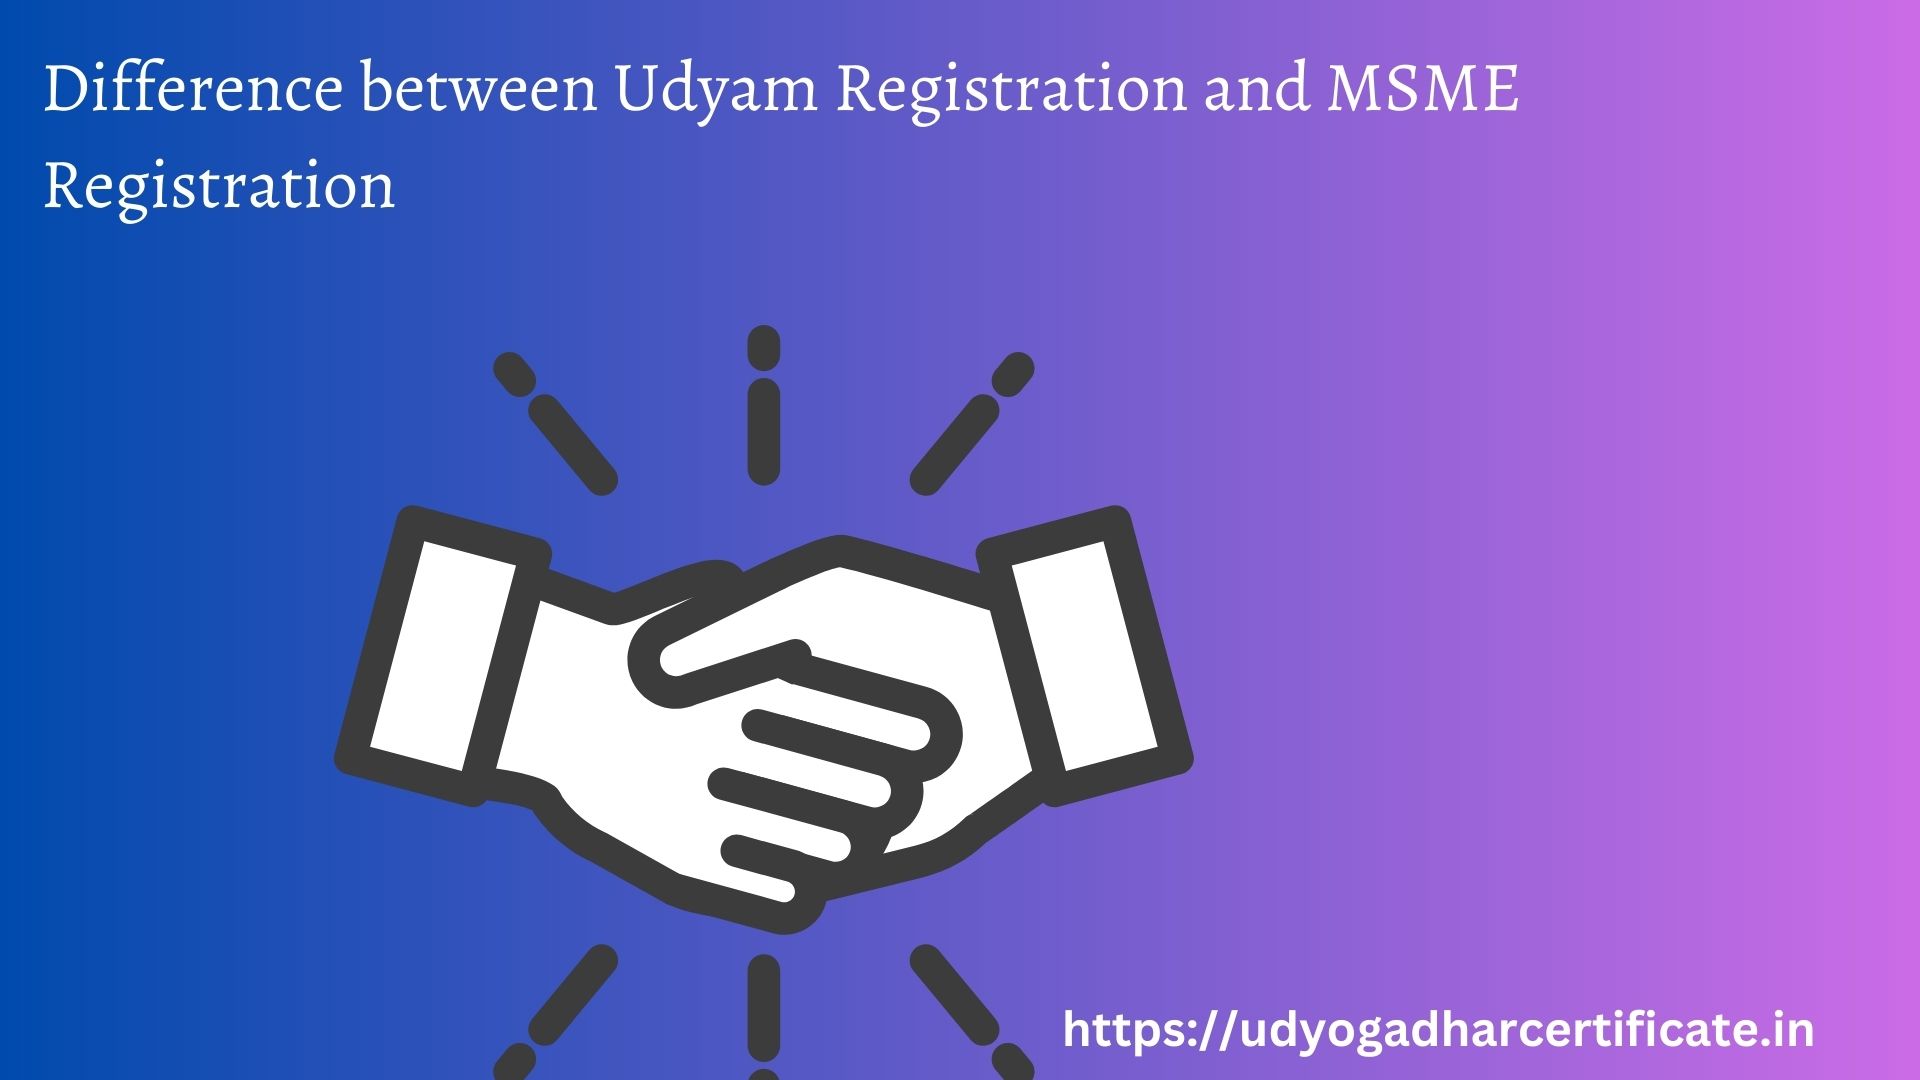 Difference between Udyam Registration and MSME Registration